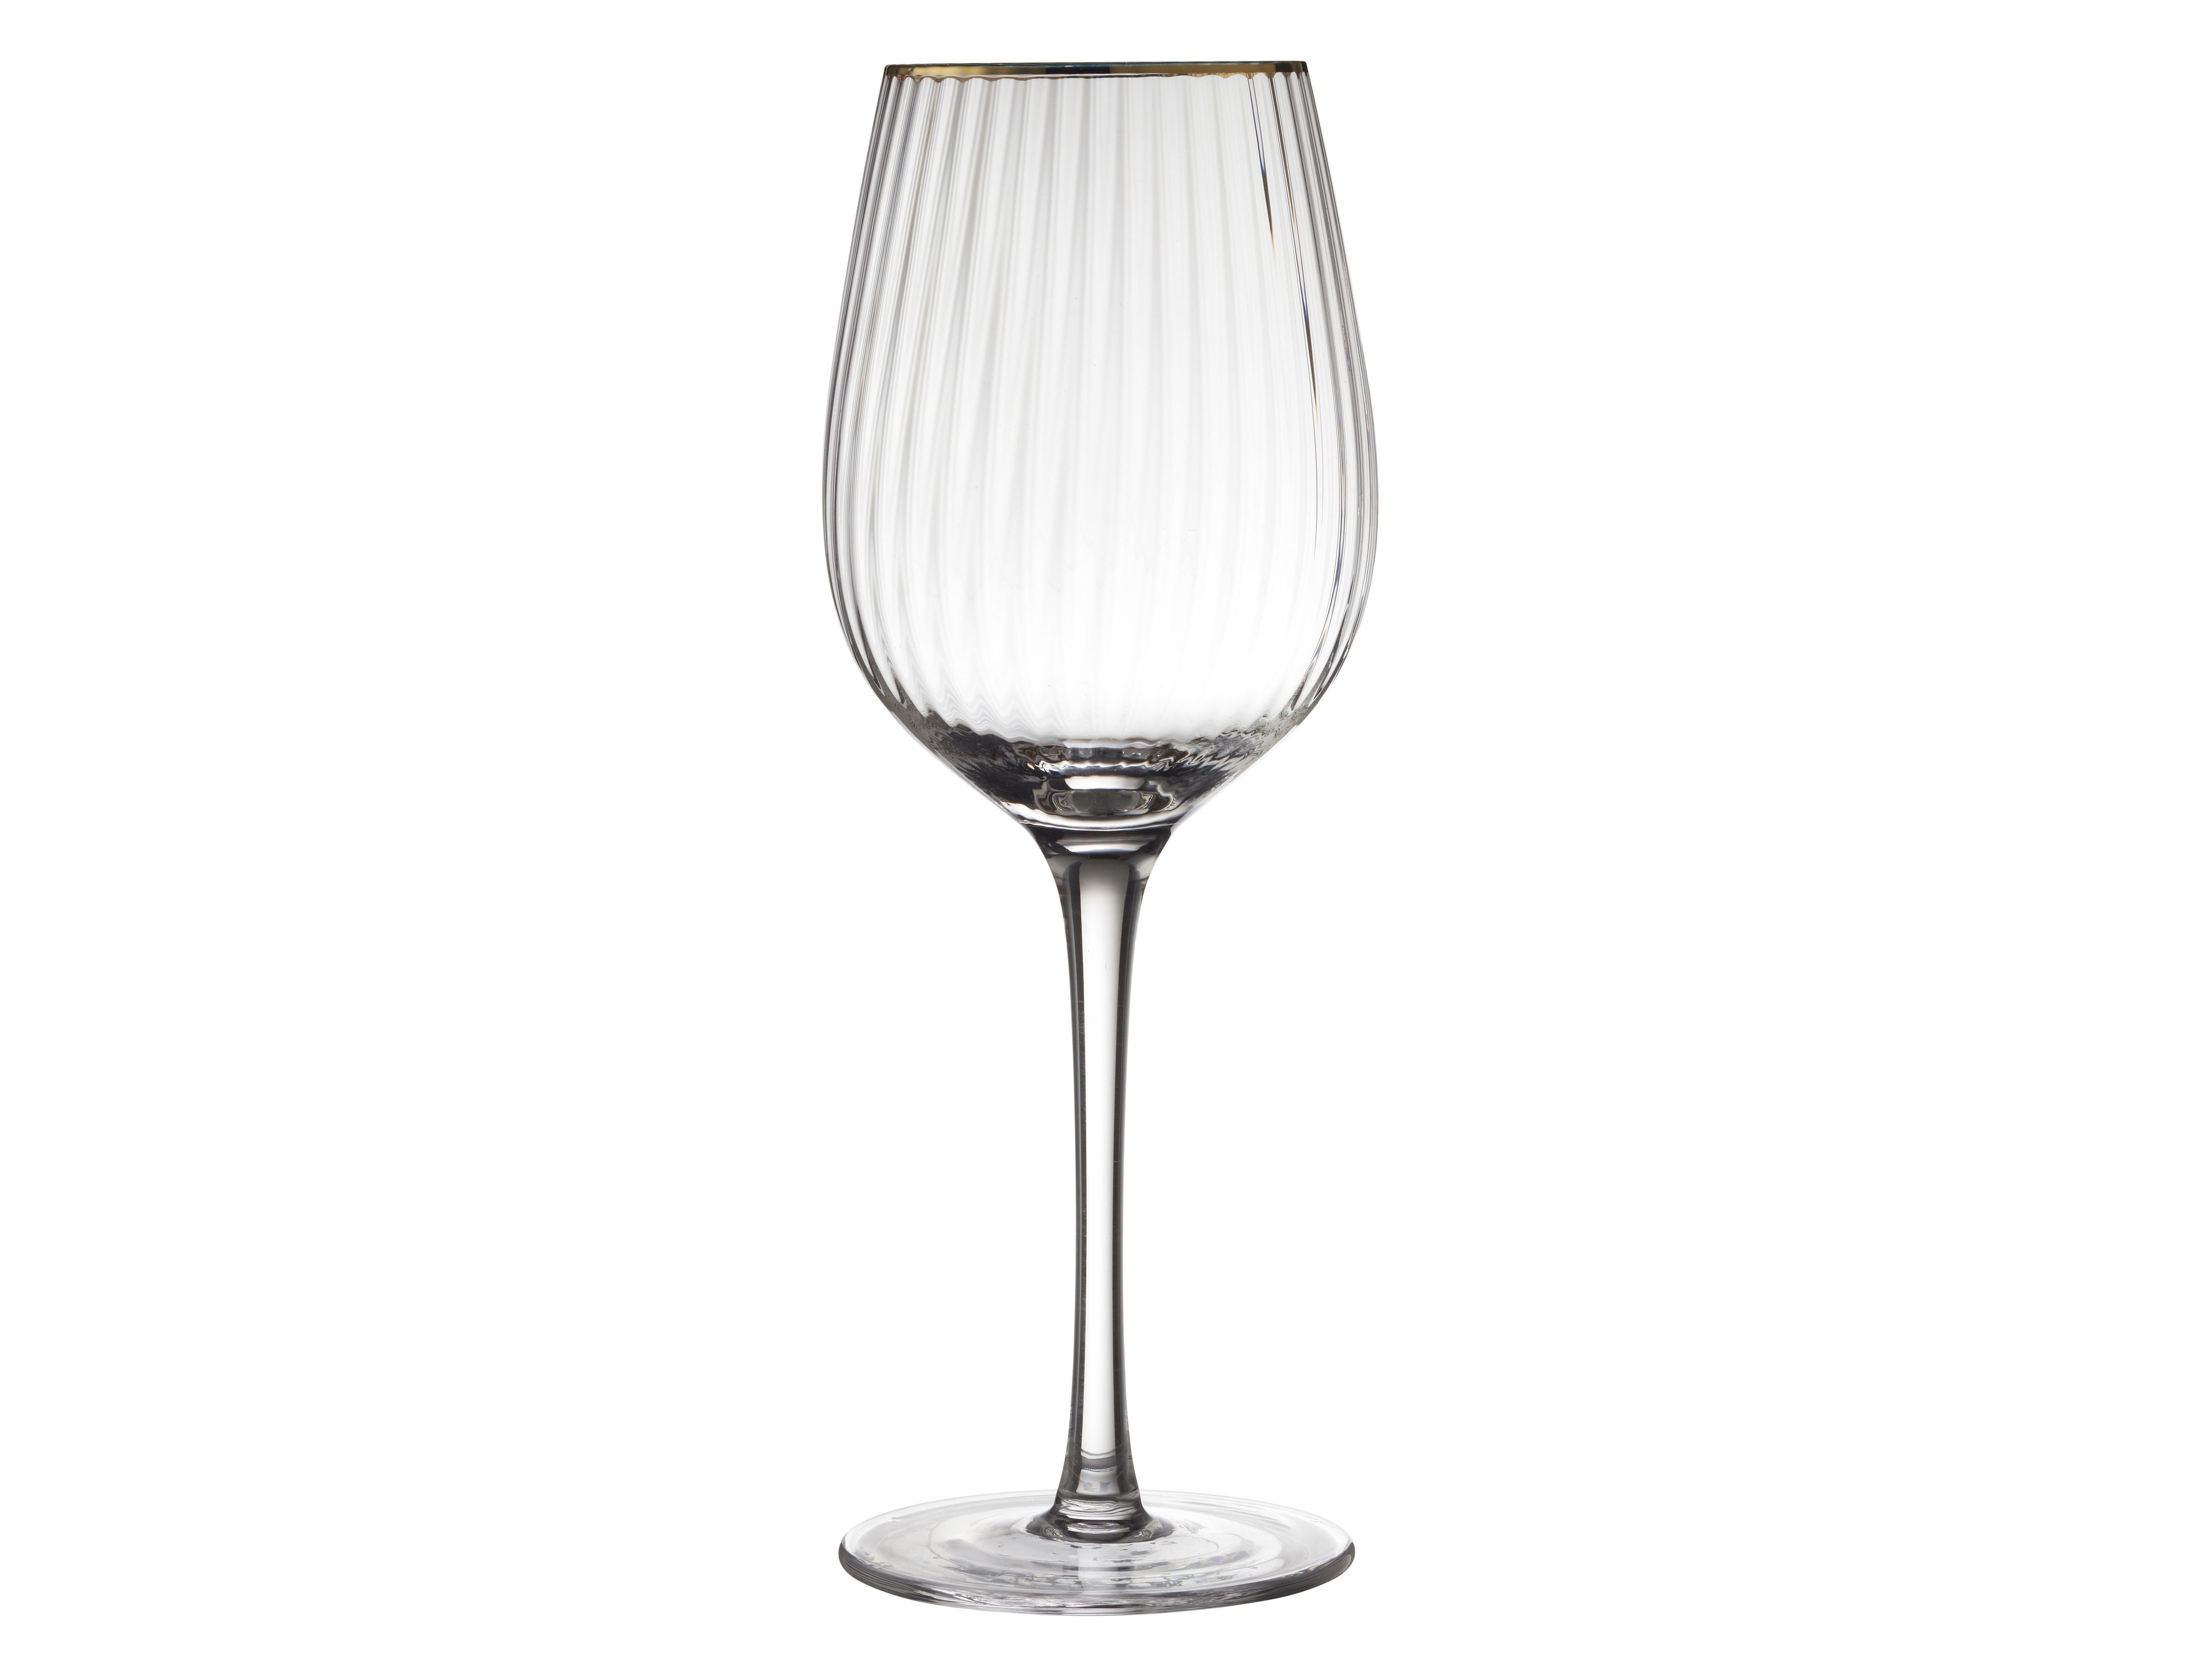 Lyngby Glas Palermo Gold Rotweinglas 40 Cl 4 Stcs.